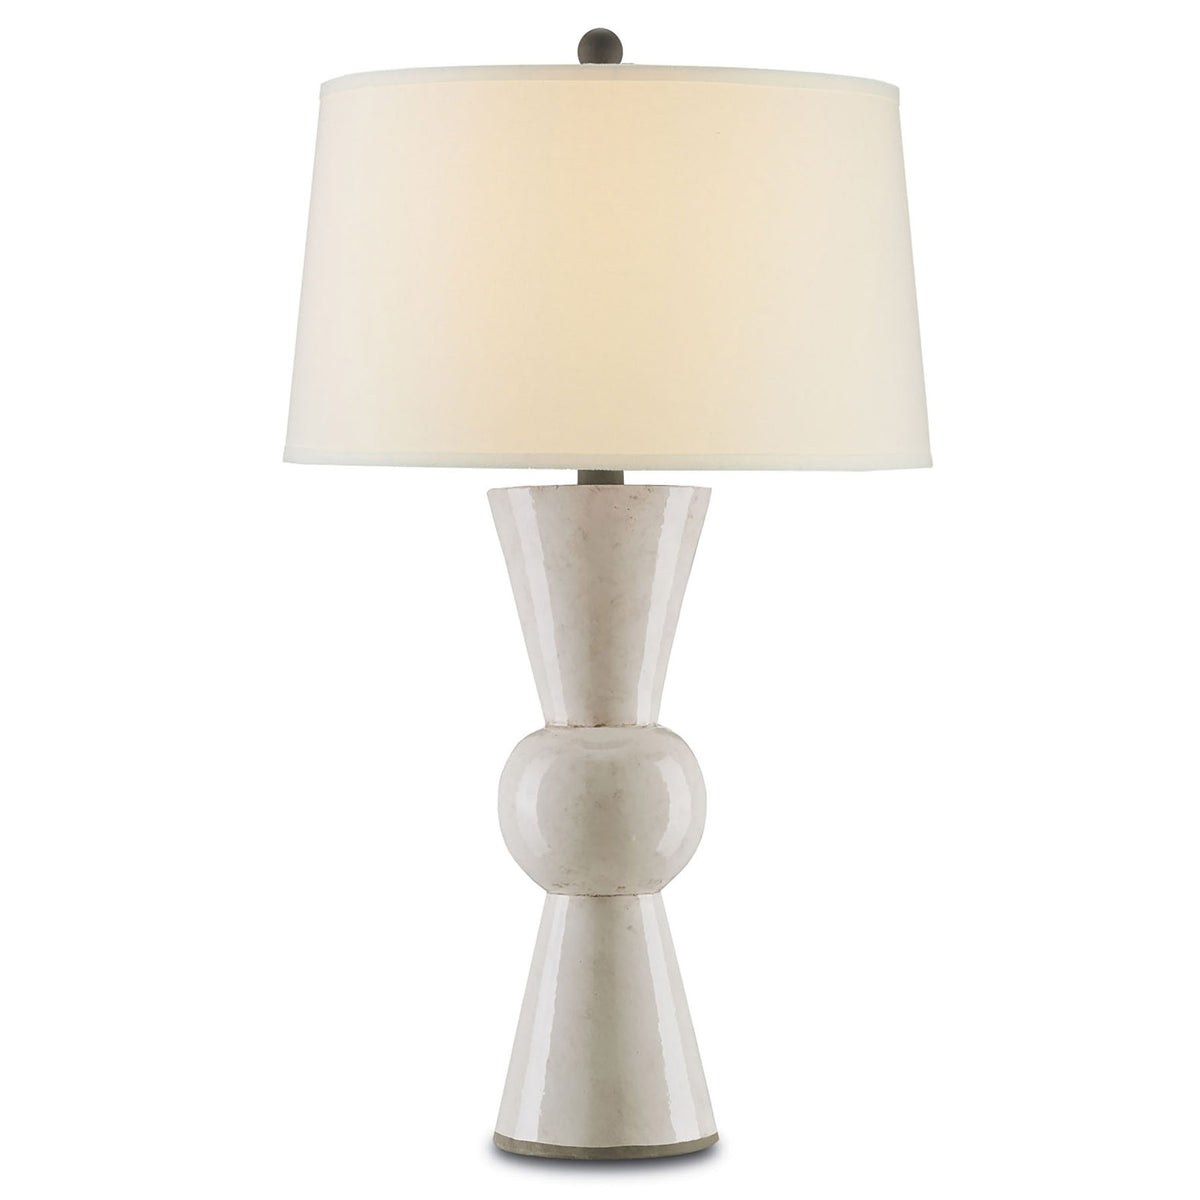 Upbeat White Table Lamp